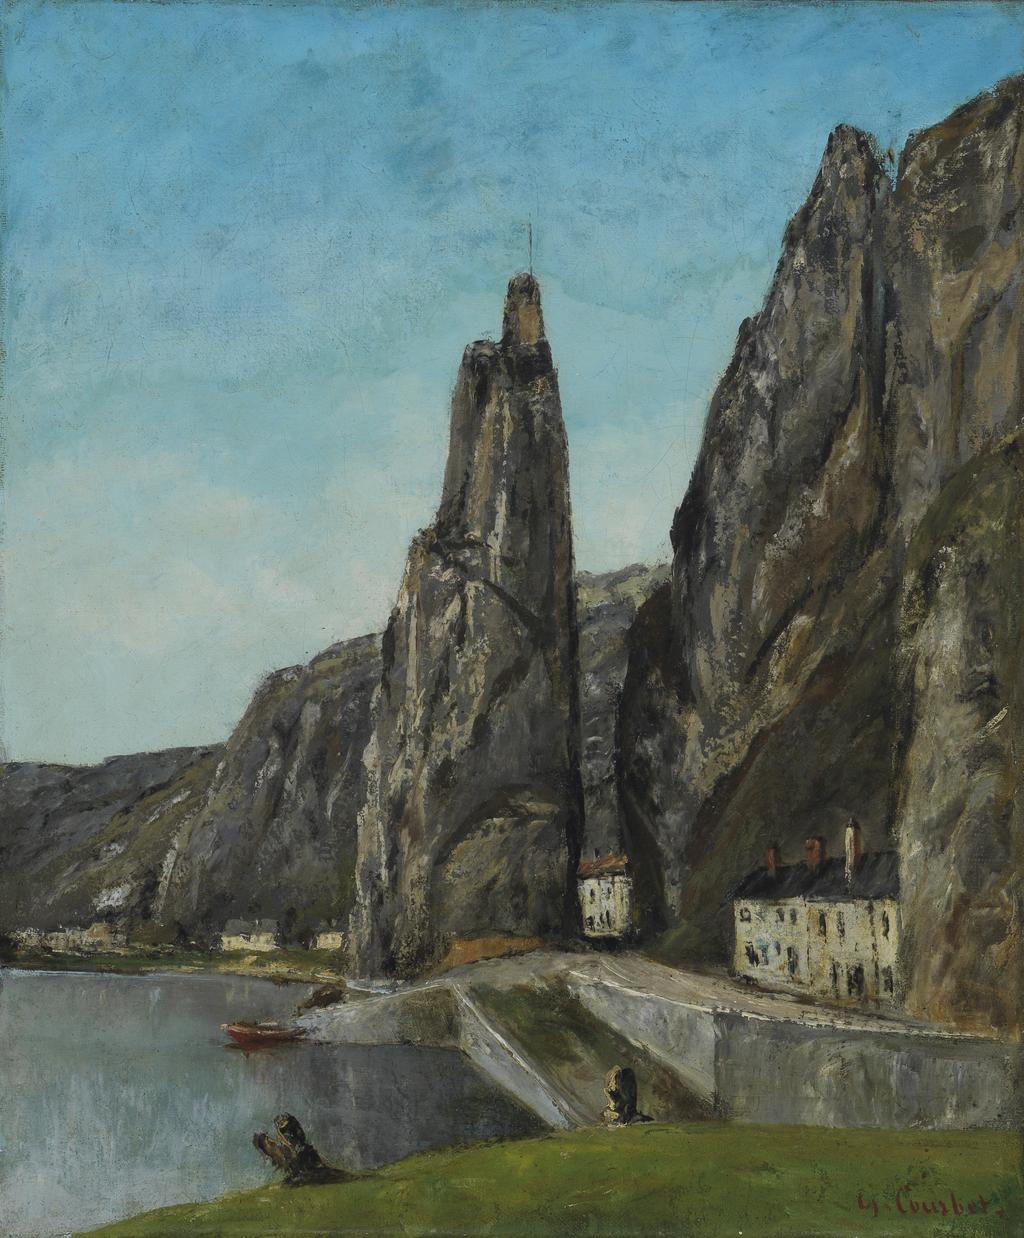 An image of La Roche à Bayard, Dinant; Translated title: The Rock at Bayard, Dinart. Courbet, Gustave (French, 1819-1877). Oil on canvas, height 56 cm, width 47 cm, in or after 1856.